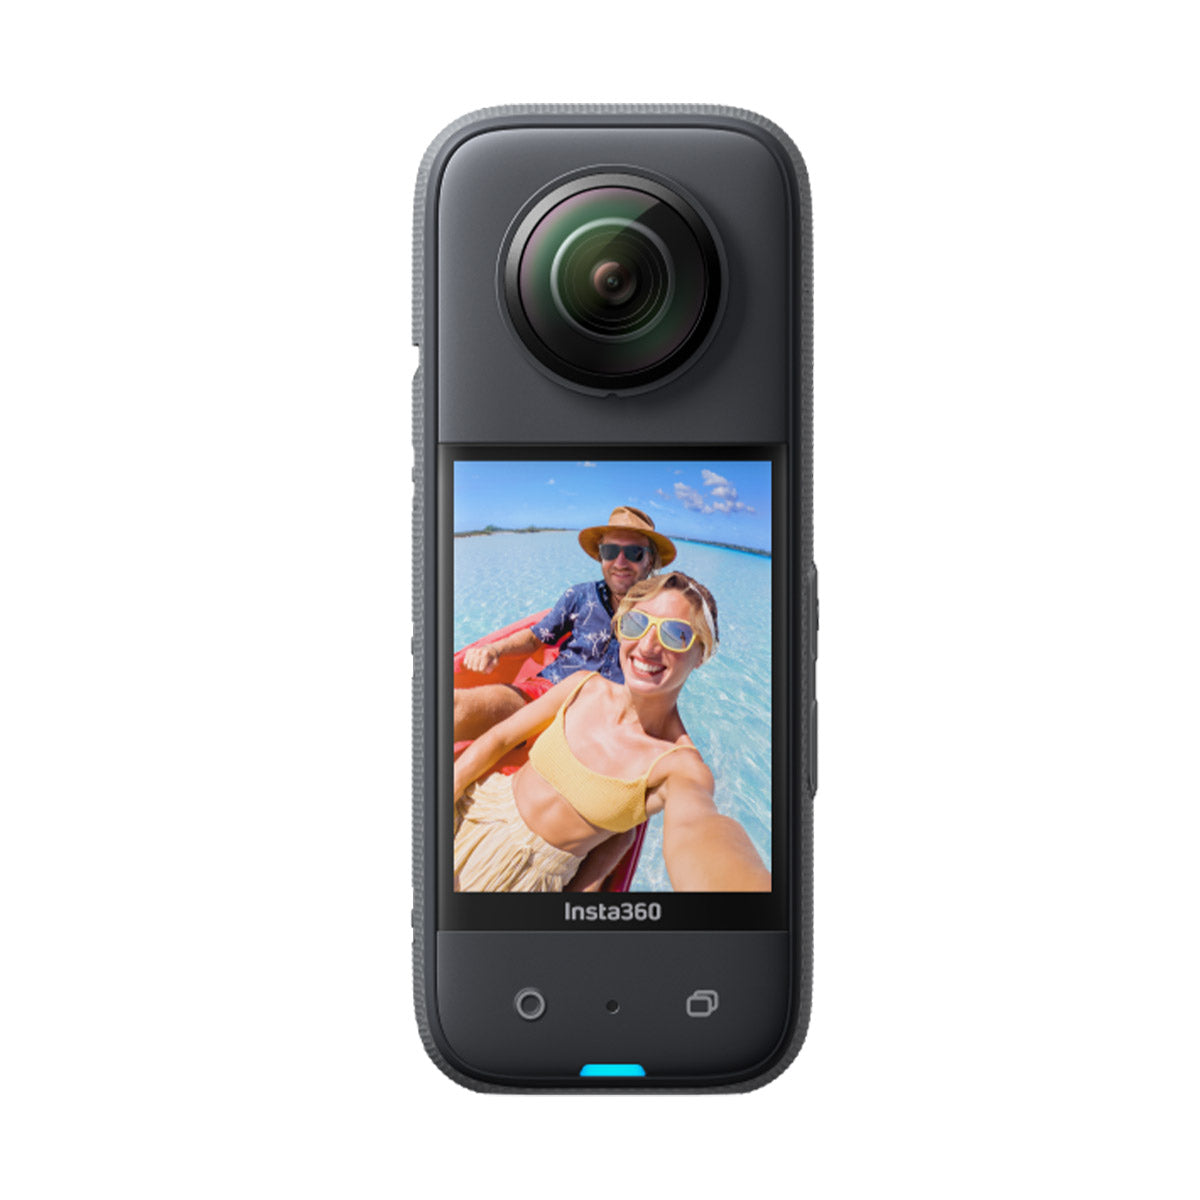 Can I use the Insta360 One X2 for drone photography and videography?